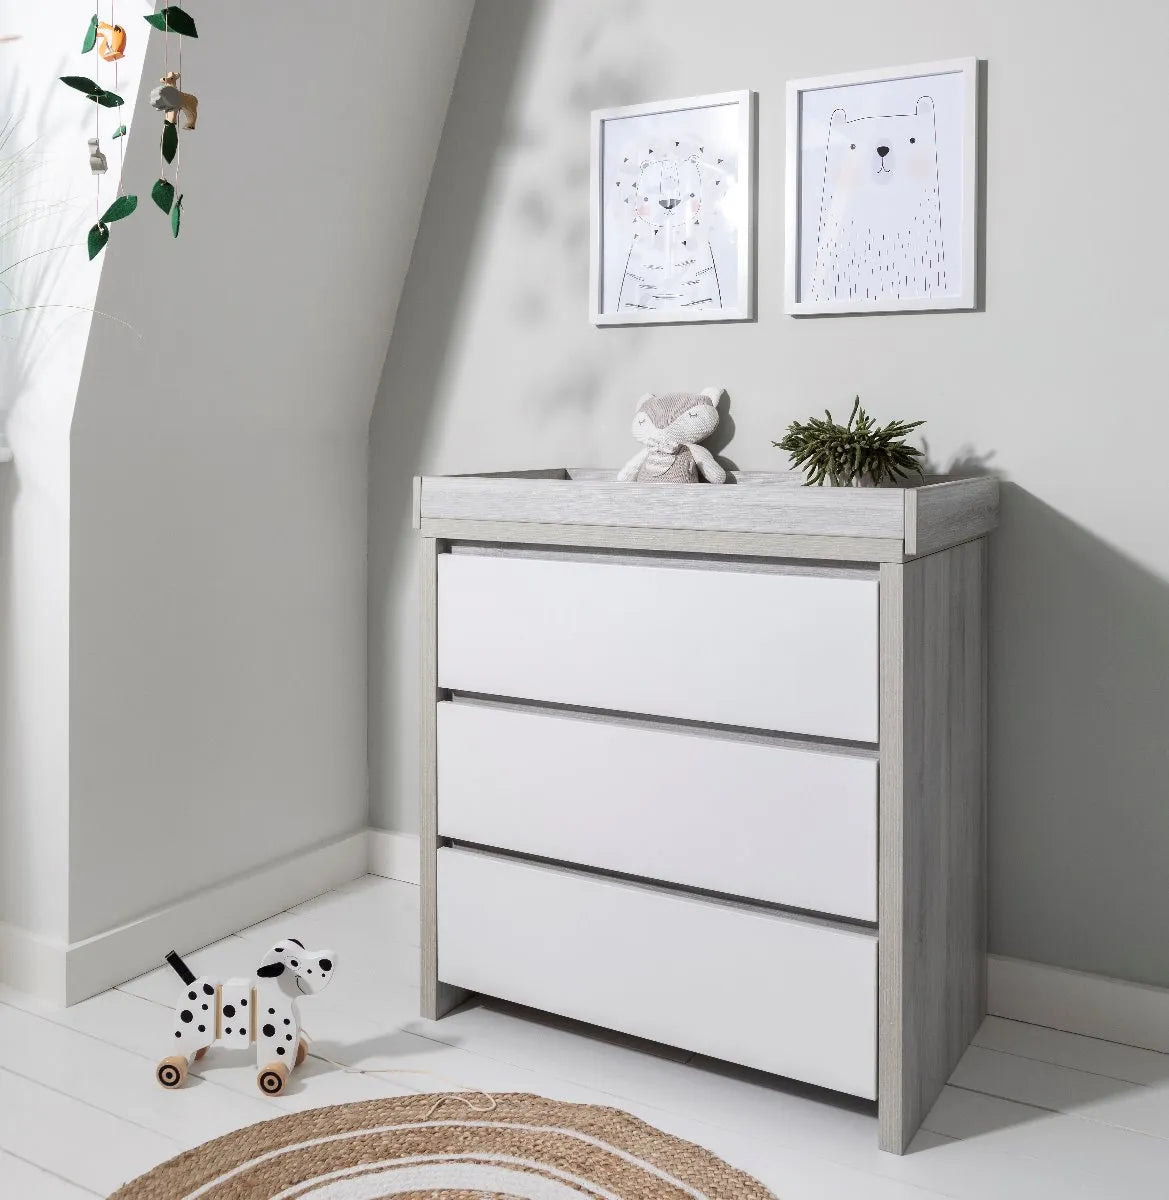 Modena 3 in 1 Cot Bed & Mattress with Changing Unit - Grey Ash/White